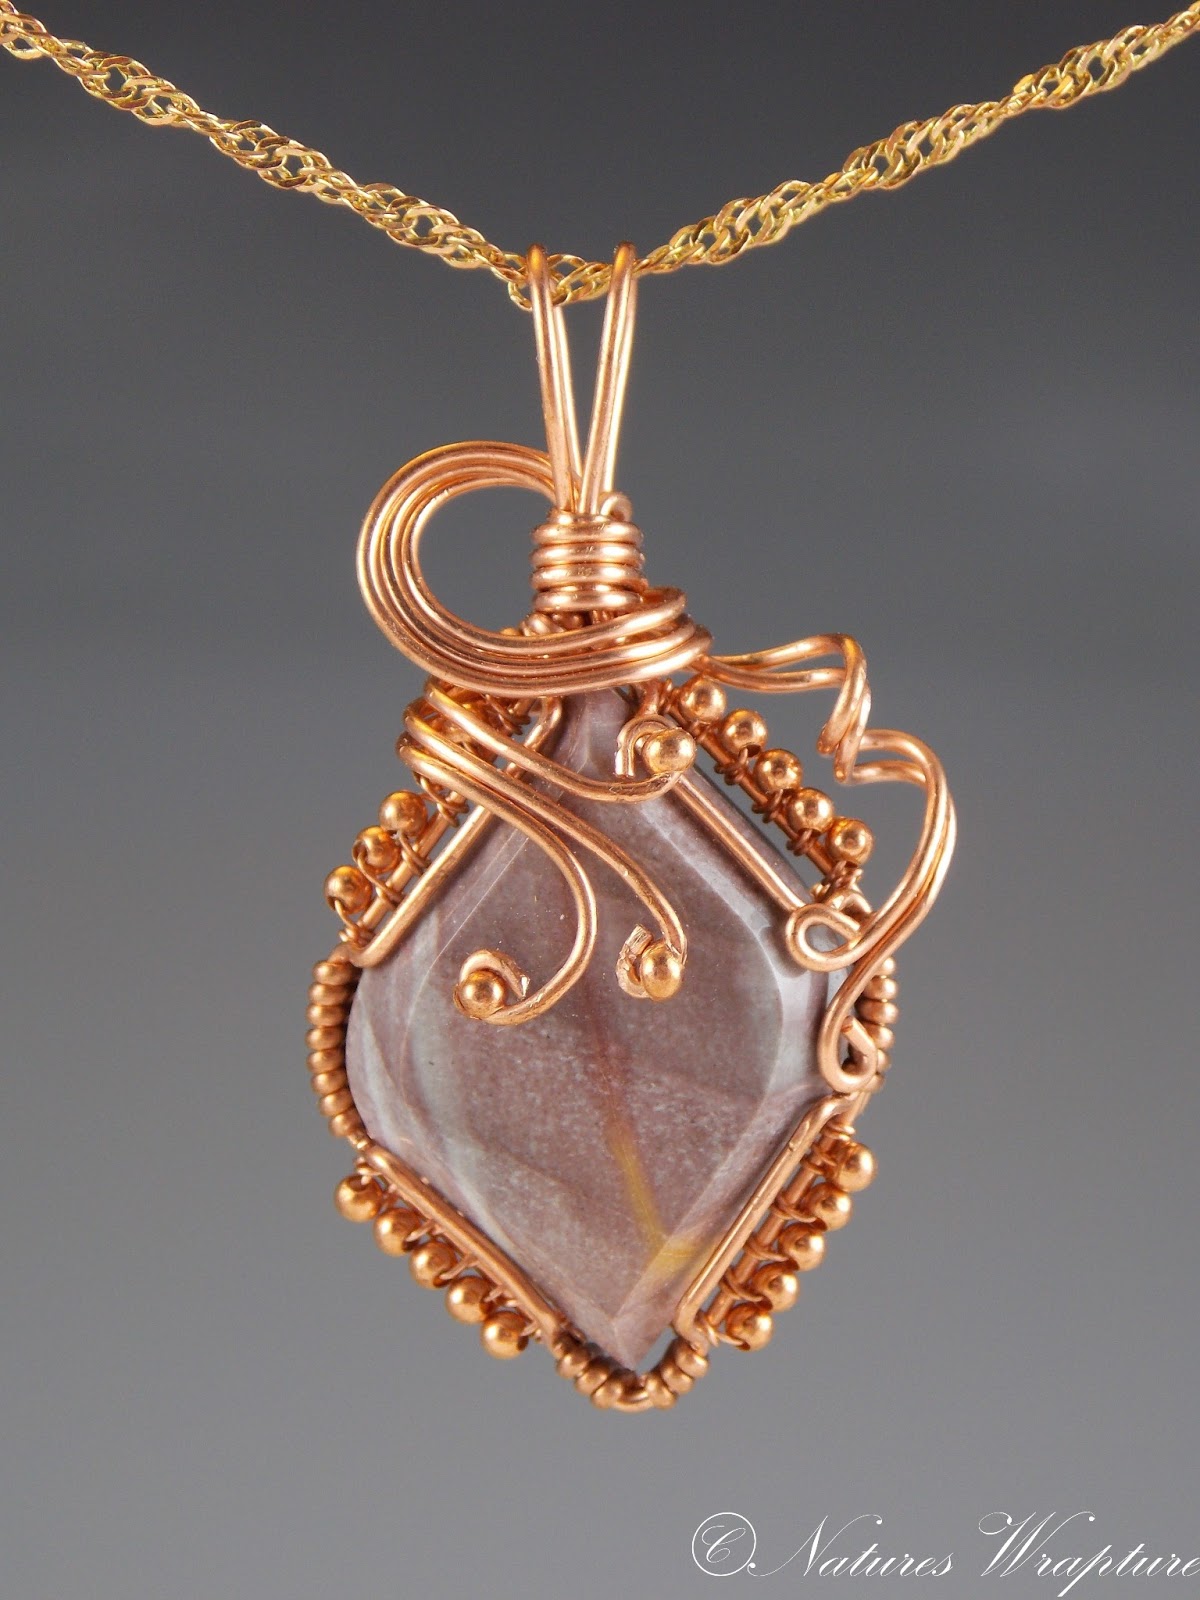 NaturesWrapture: Care and Cleaning of Handmade Copper Jewelry